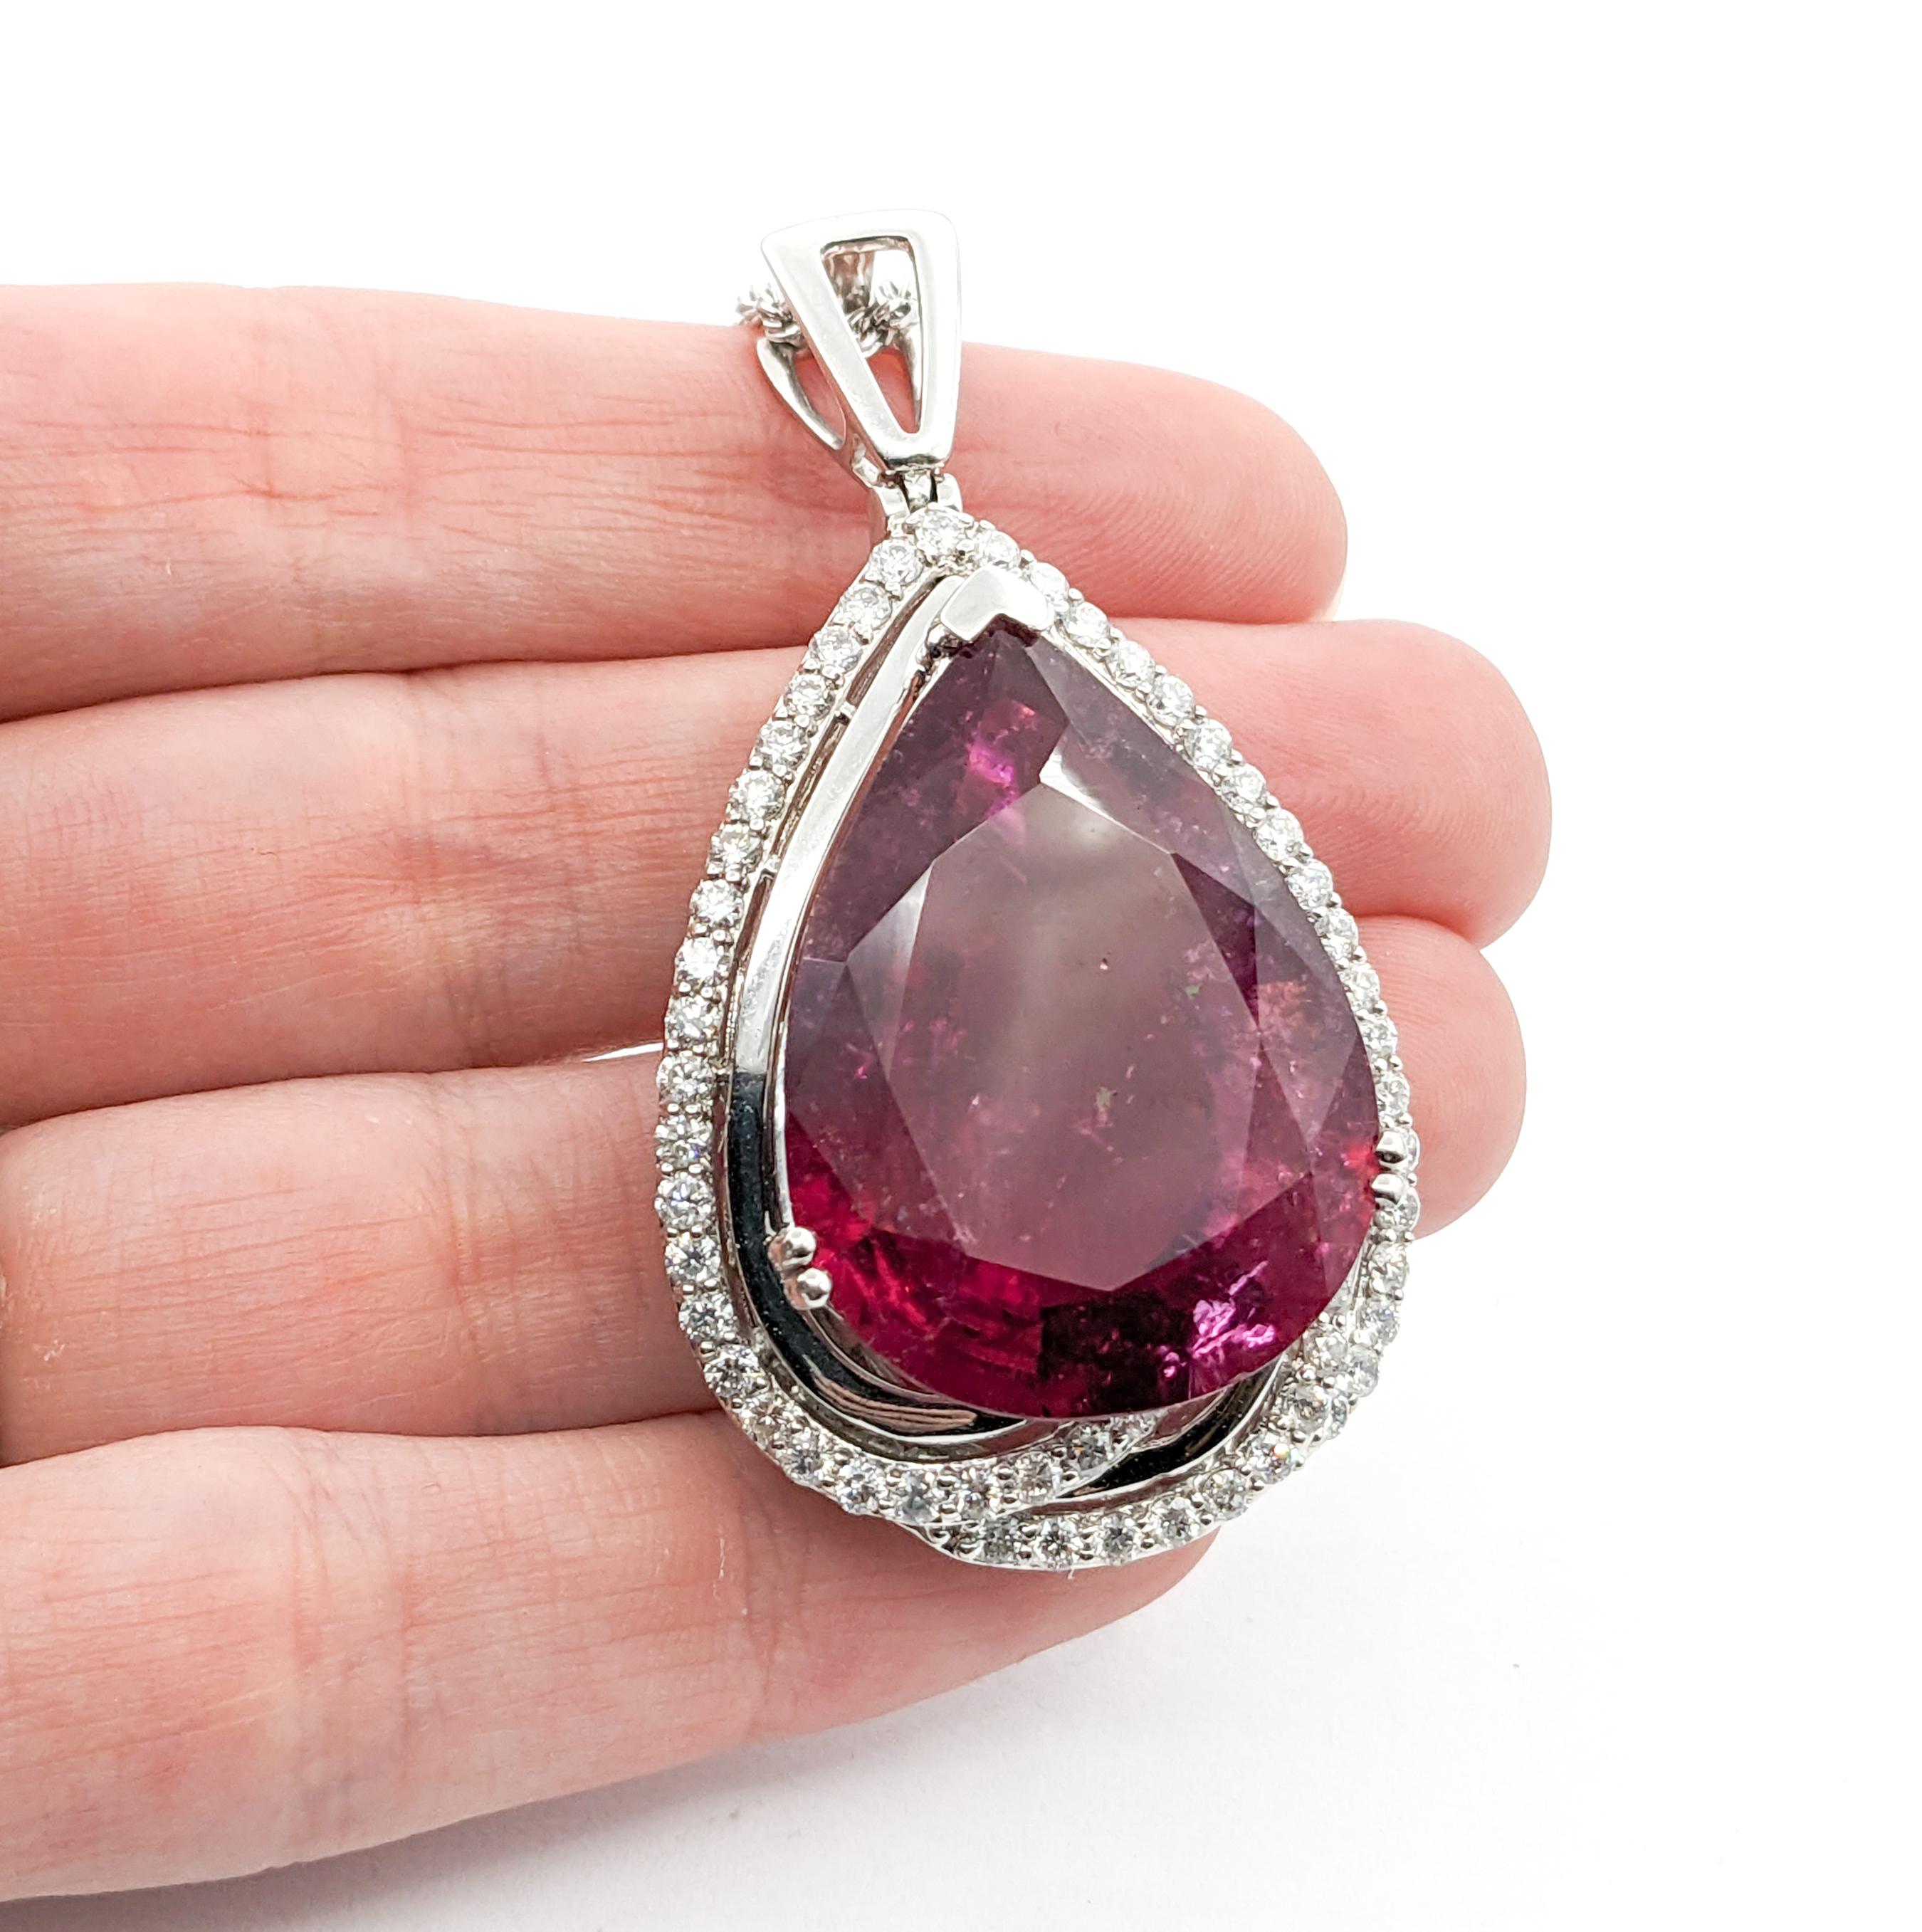 35.75ct Pink GIA Rubellite Tourmaline Pear & Diamond Necklace In Platinum For Sale 2